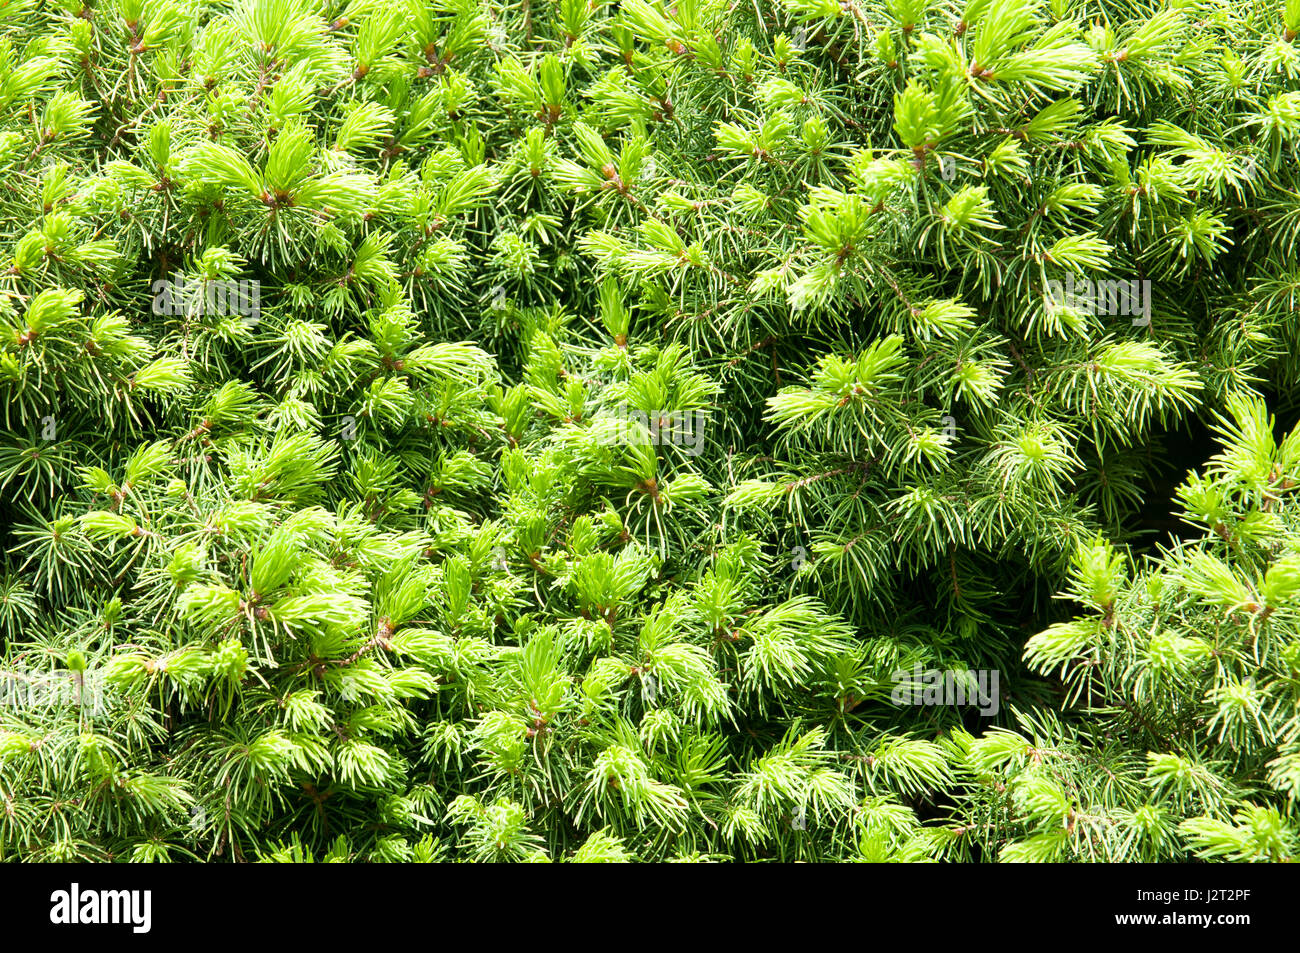 Picea glauca is a species of spruce originally from North America, specifically Central Alaska, Newfoundland, Montana, Northern Michigan, Maine Stock Photo